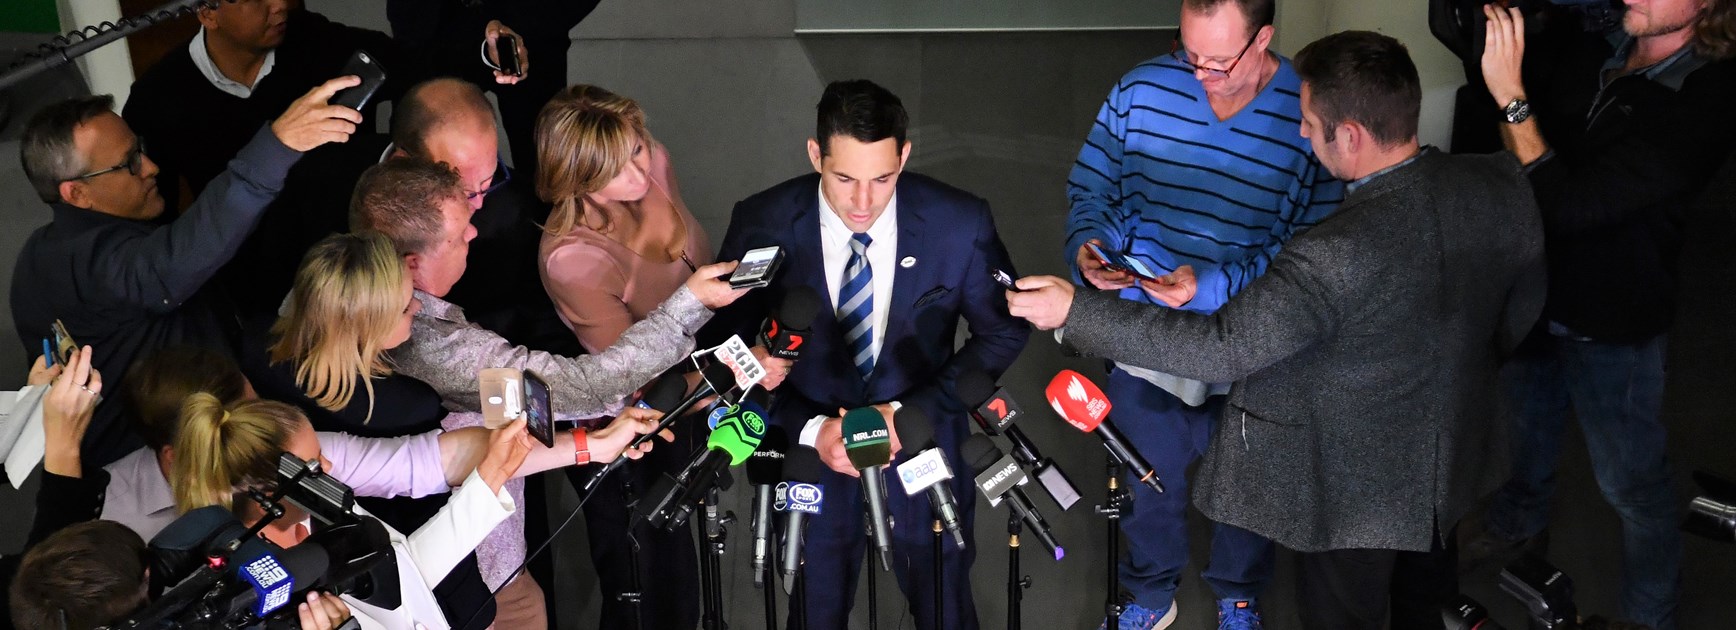 Billy Slater addresses the media following his successful judiciary hearing.